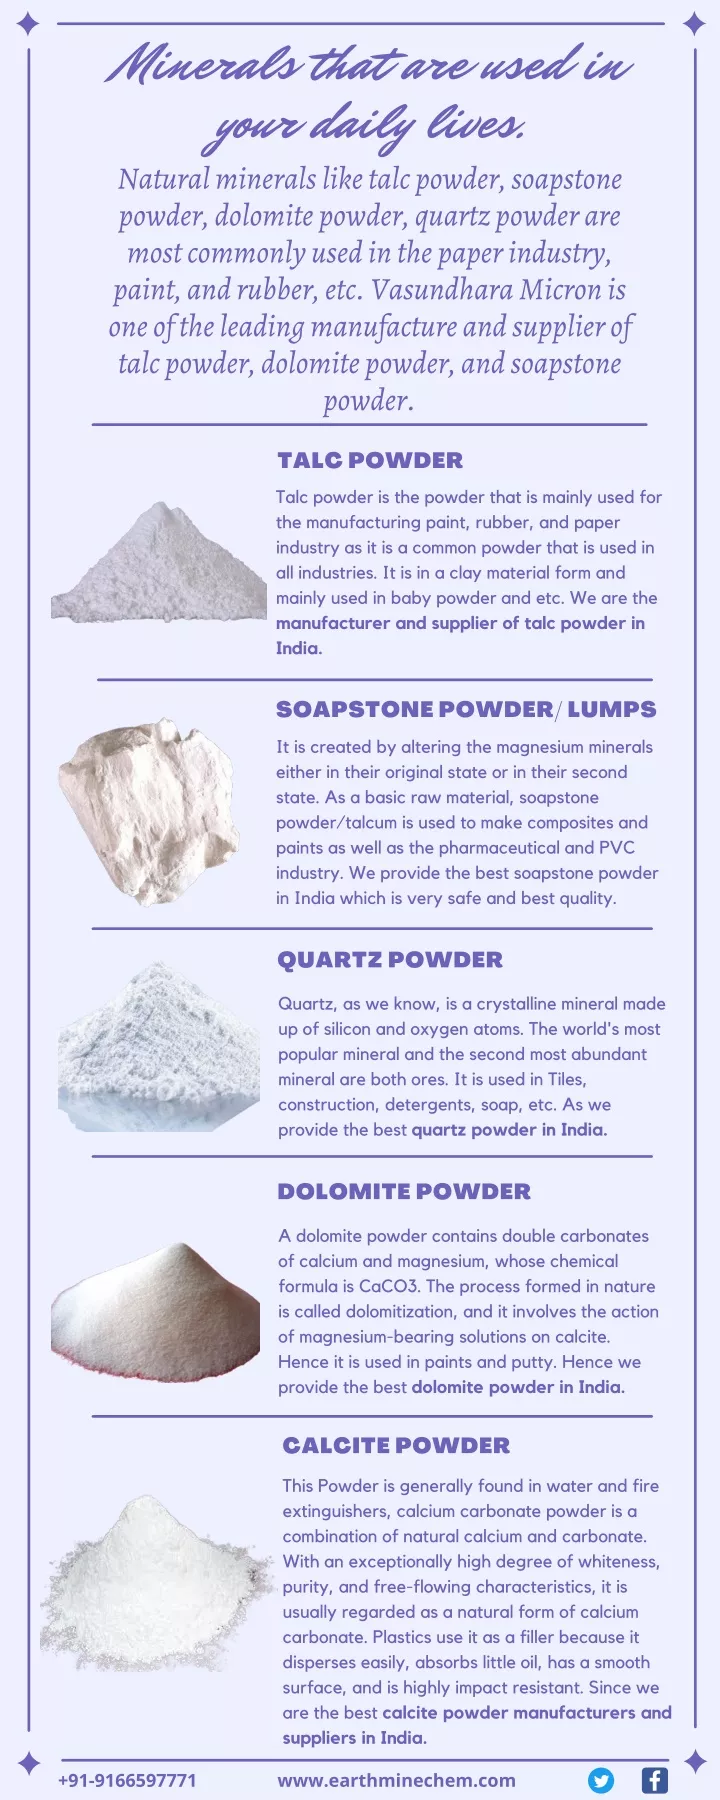 minerals that are used in your daily lives